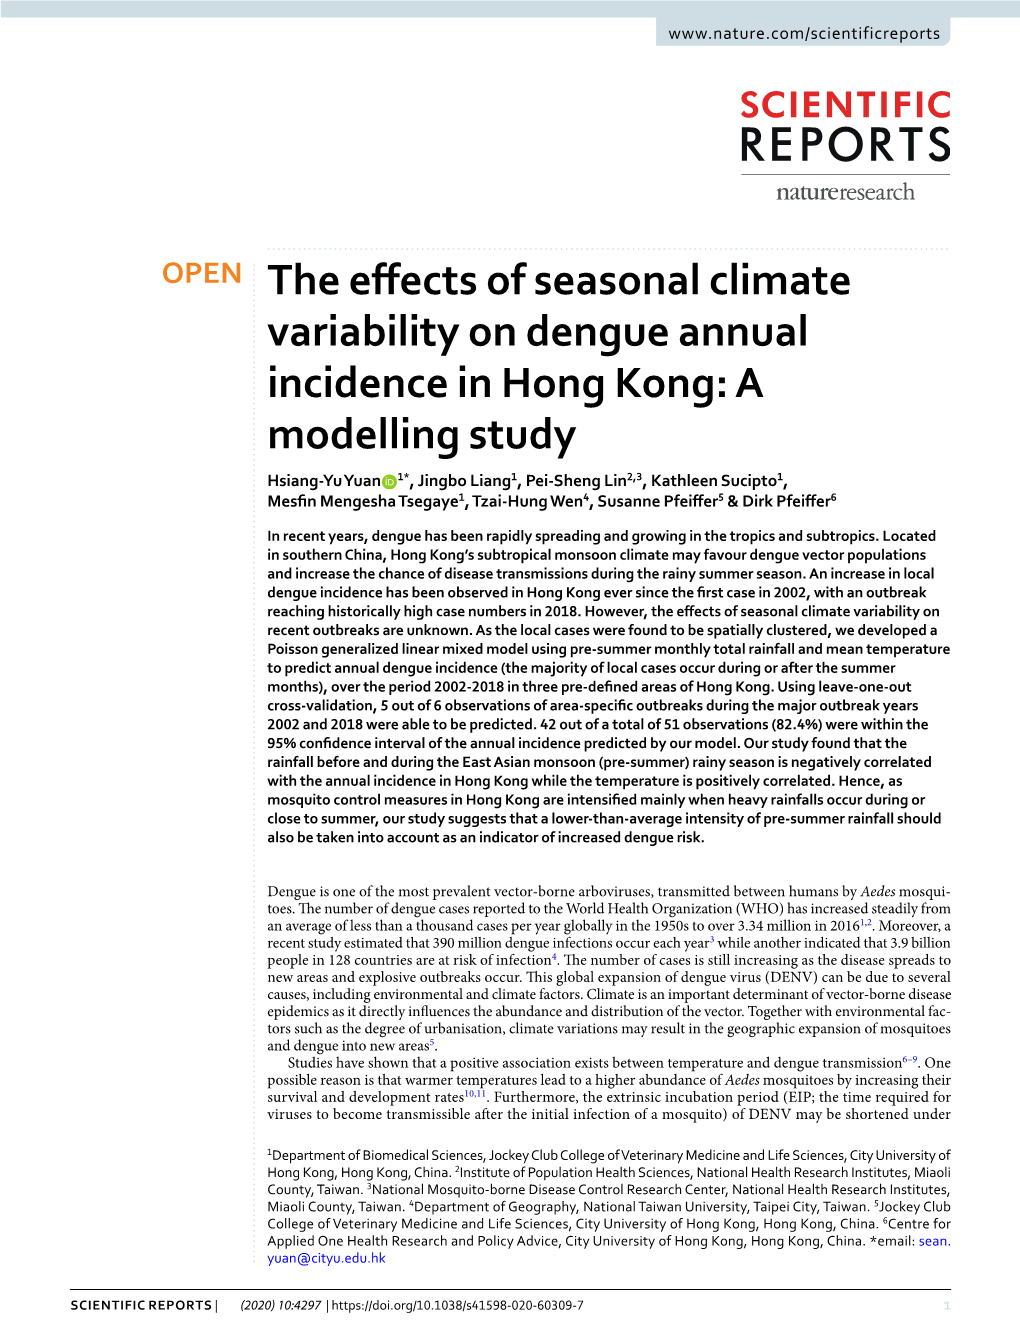 The Effects of Seasonal Climate Variability on Dengue